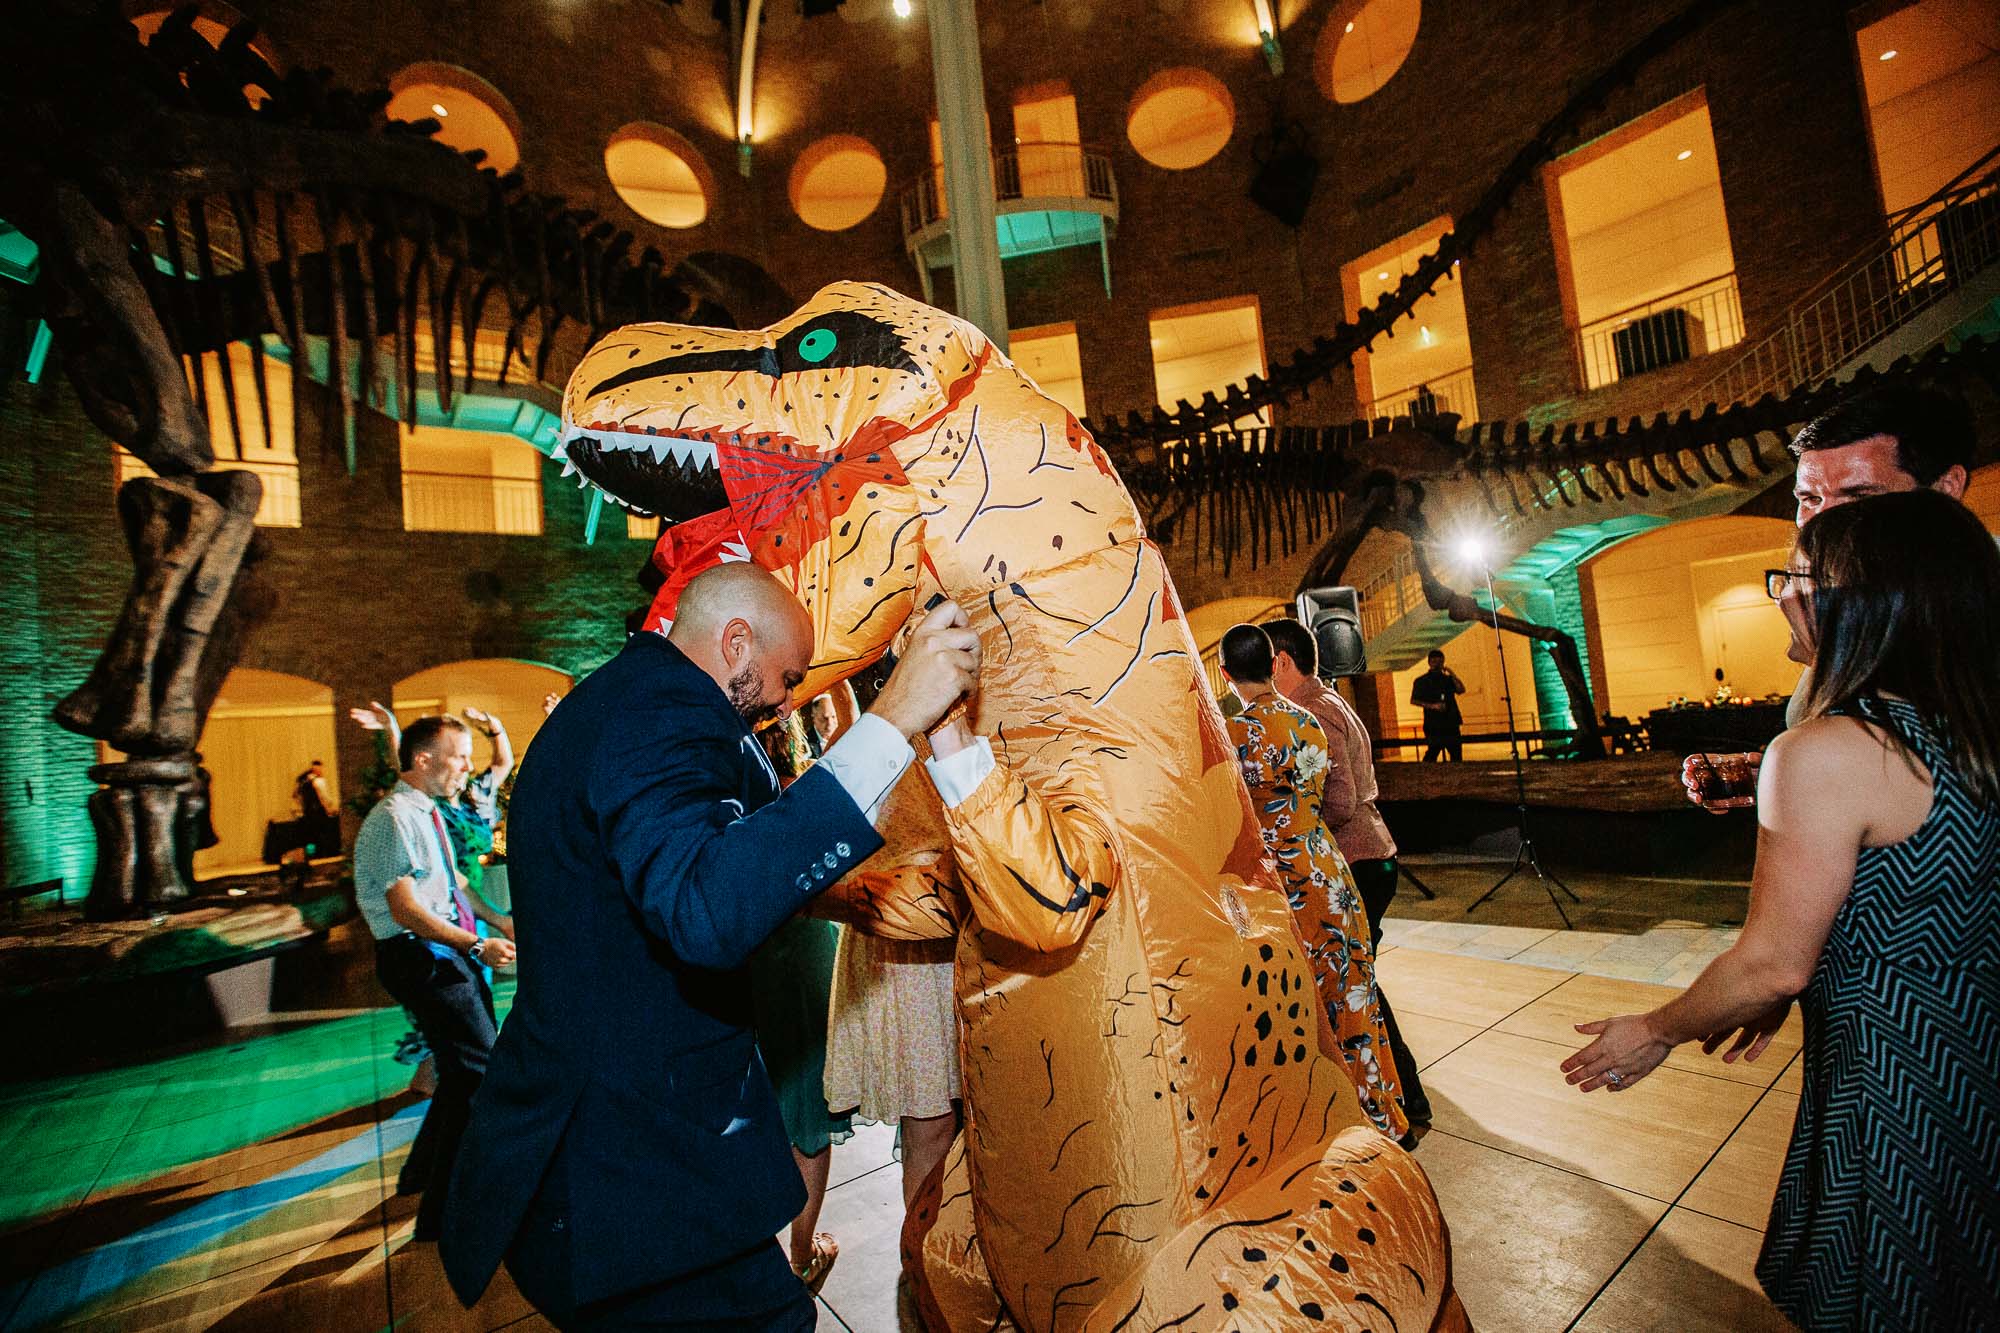 A person in a dinosaur costume dances with the groom at a wedding at Fern Bank museum